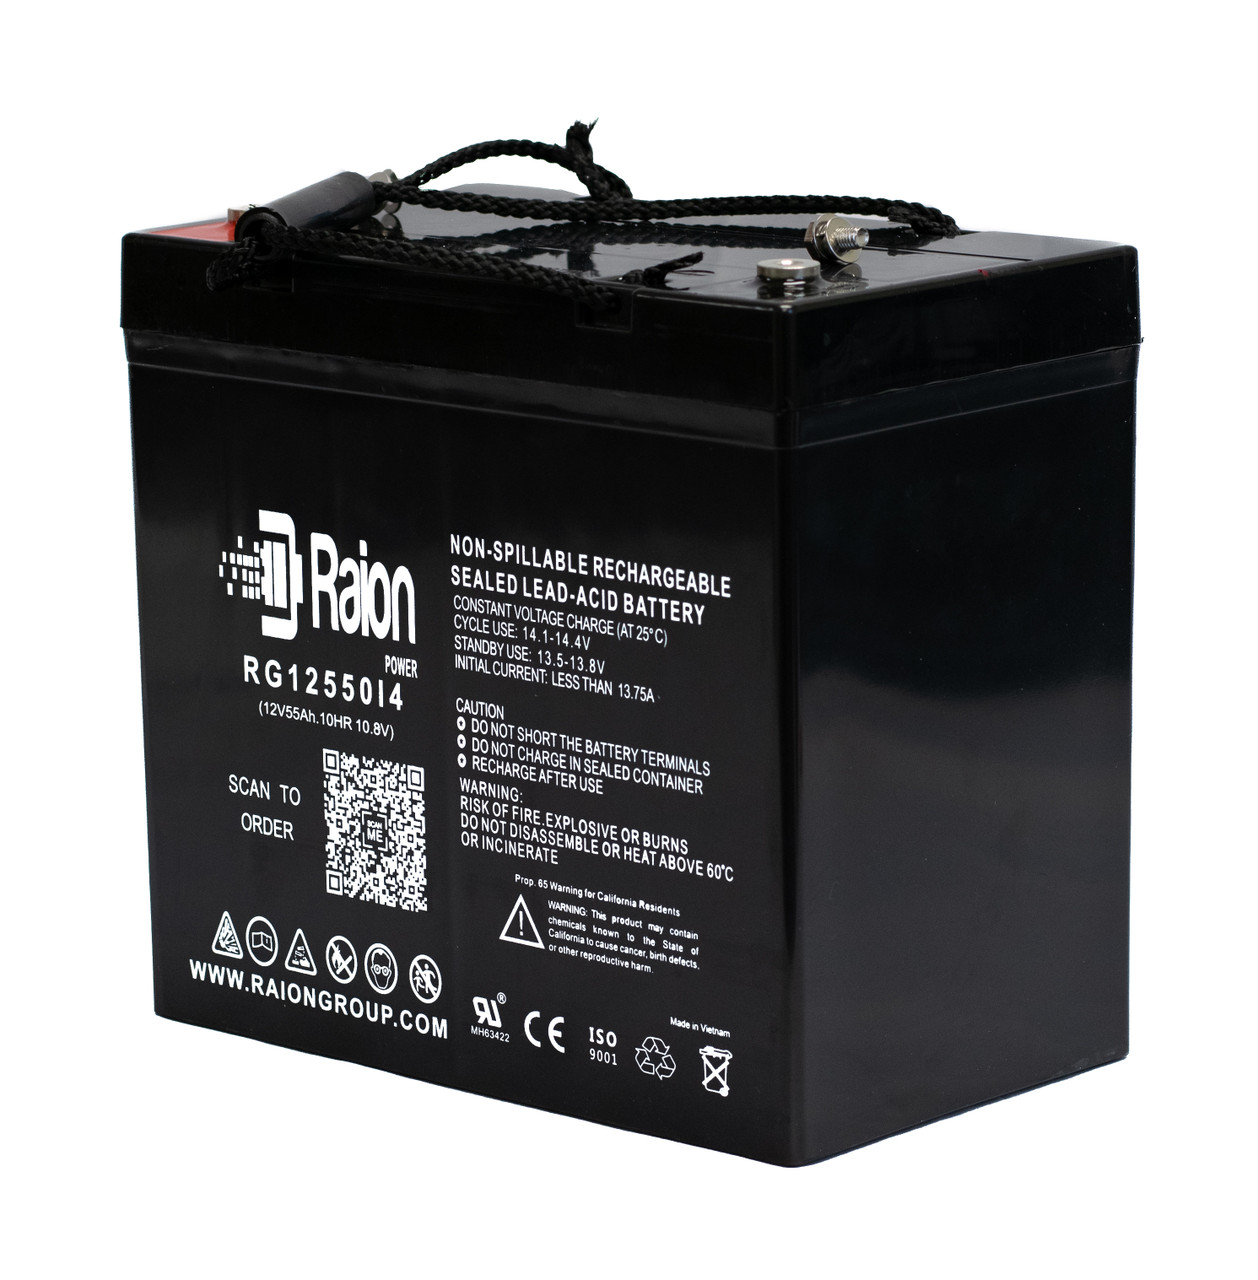 Raion Power 12V 55Ah 22NF Mobility Scooter Battery Replacement for Fortress Scientific 655